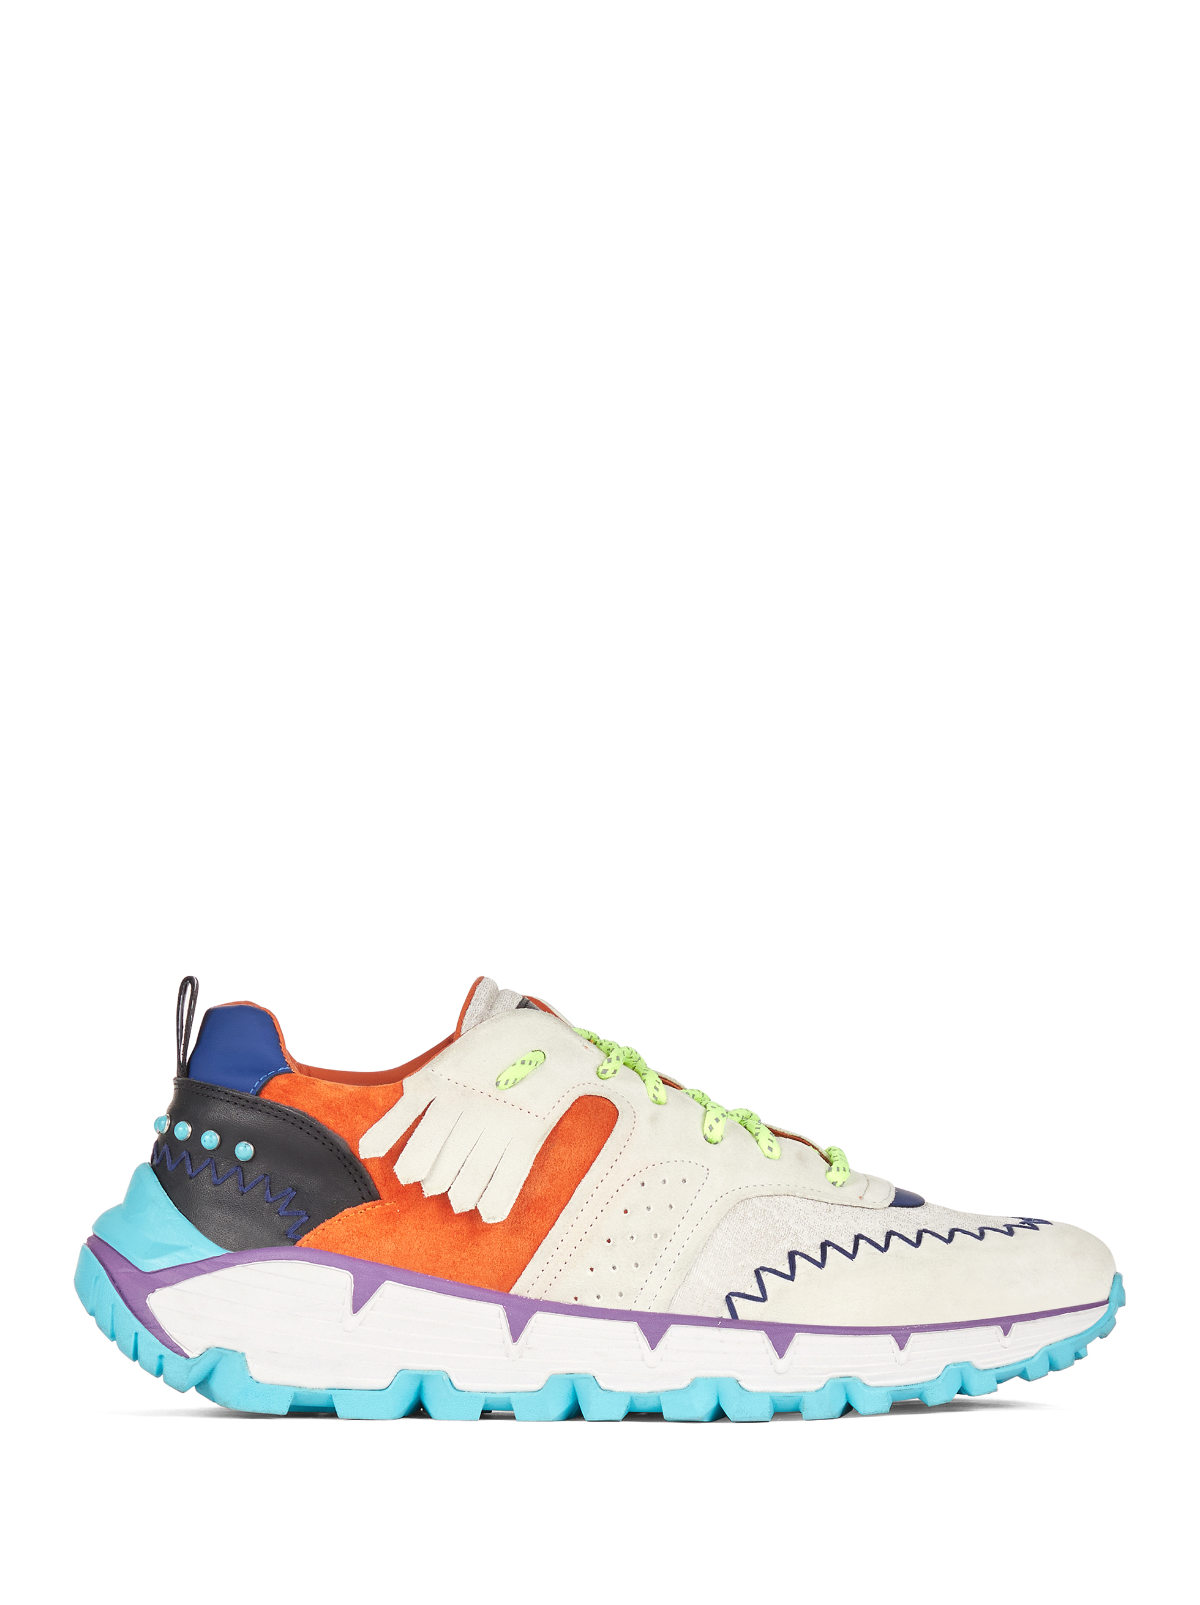 Etro: Etro Launches The New Earthbeat Sneaker - Luxferity